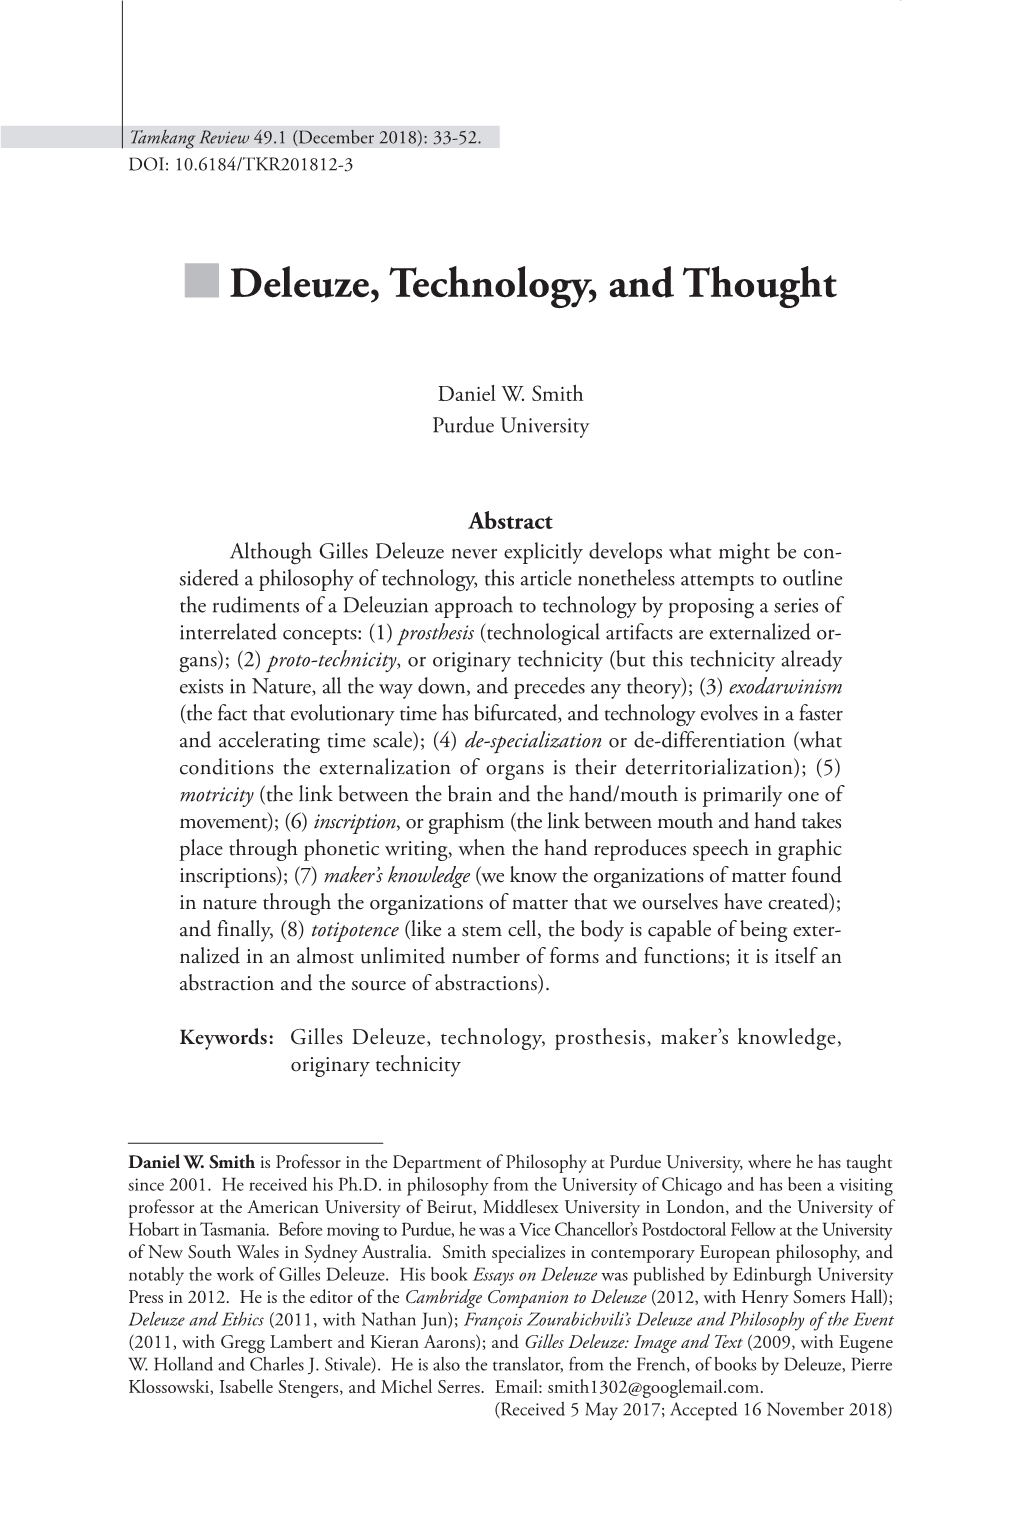 Deleuze, Technology, and Thought